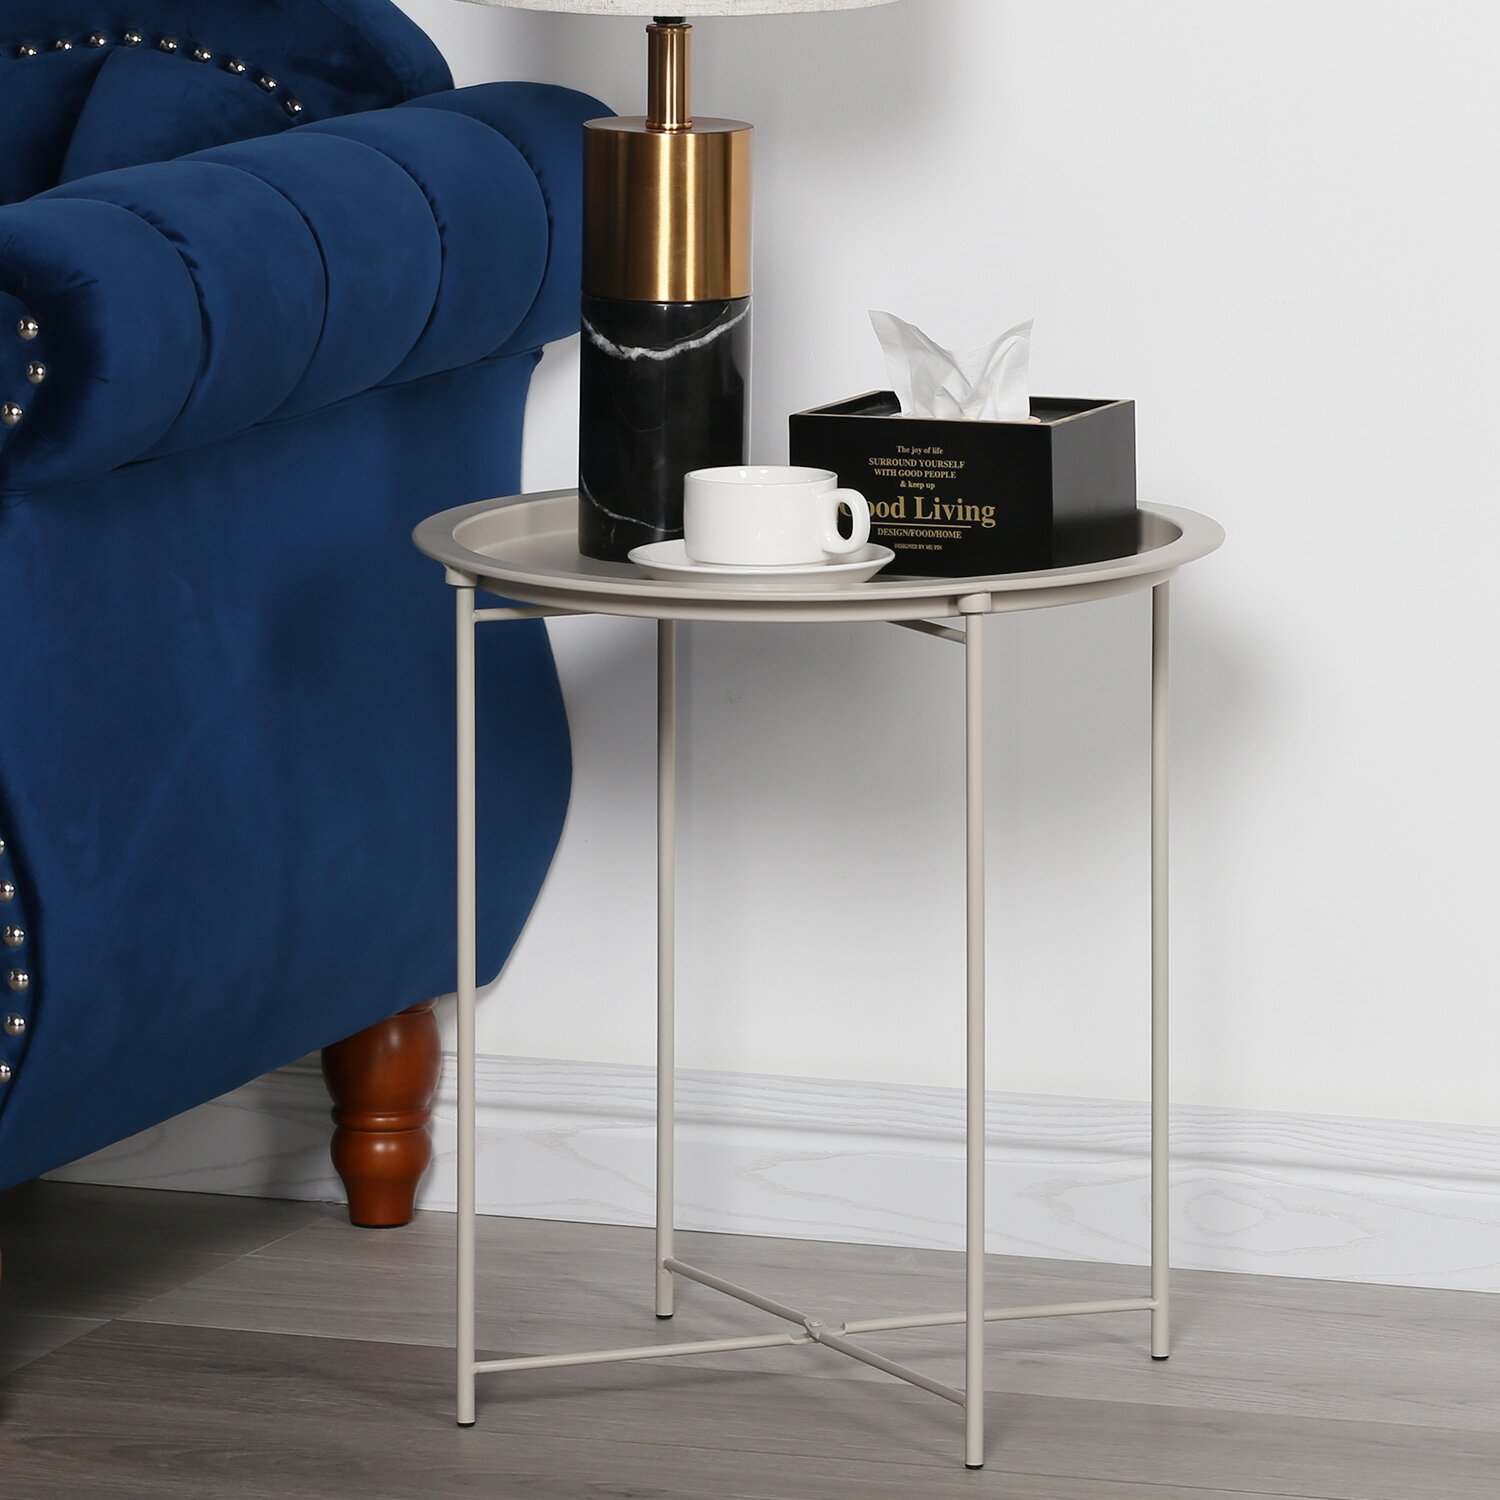 Annalei Tray Top Cross Legs End Table, Multi-use: Small Round Side End Table, Sofa Table, Tray Side Table, Snack Table, Metal, Anti-Rusty, Outdoor and Indoor Use for Putting Small Things., T - image 1 of 3